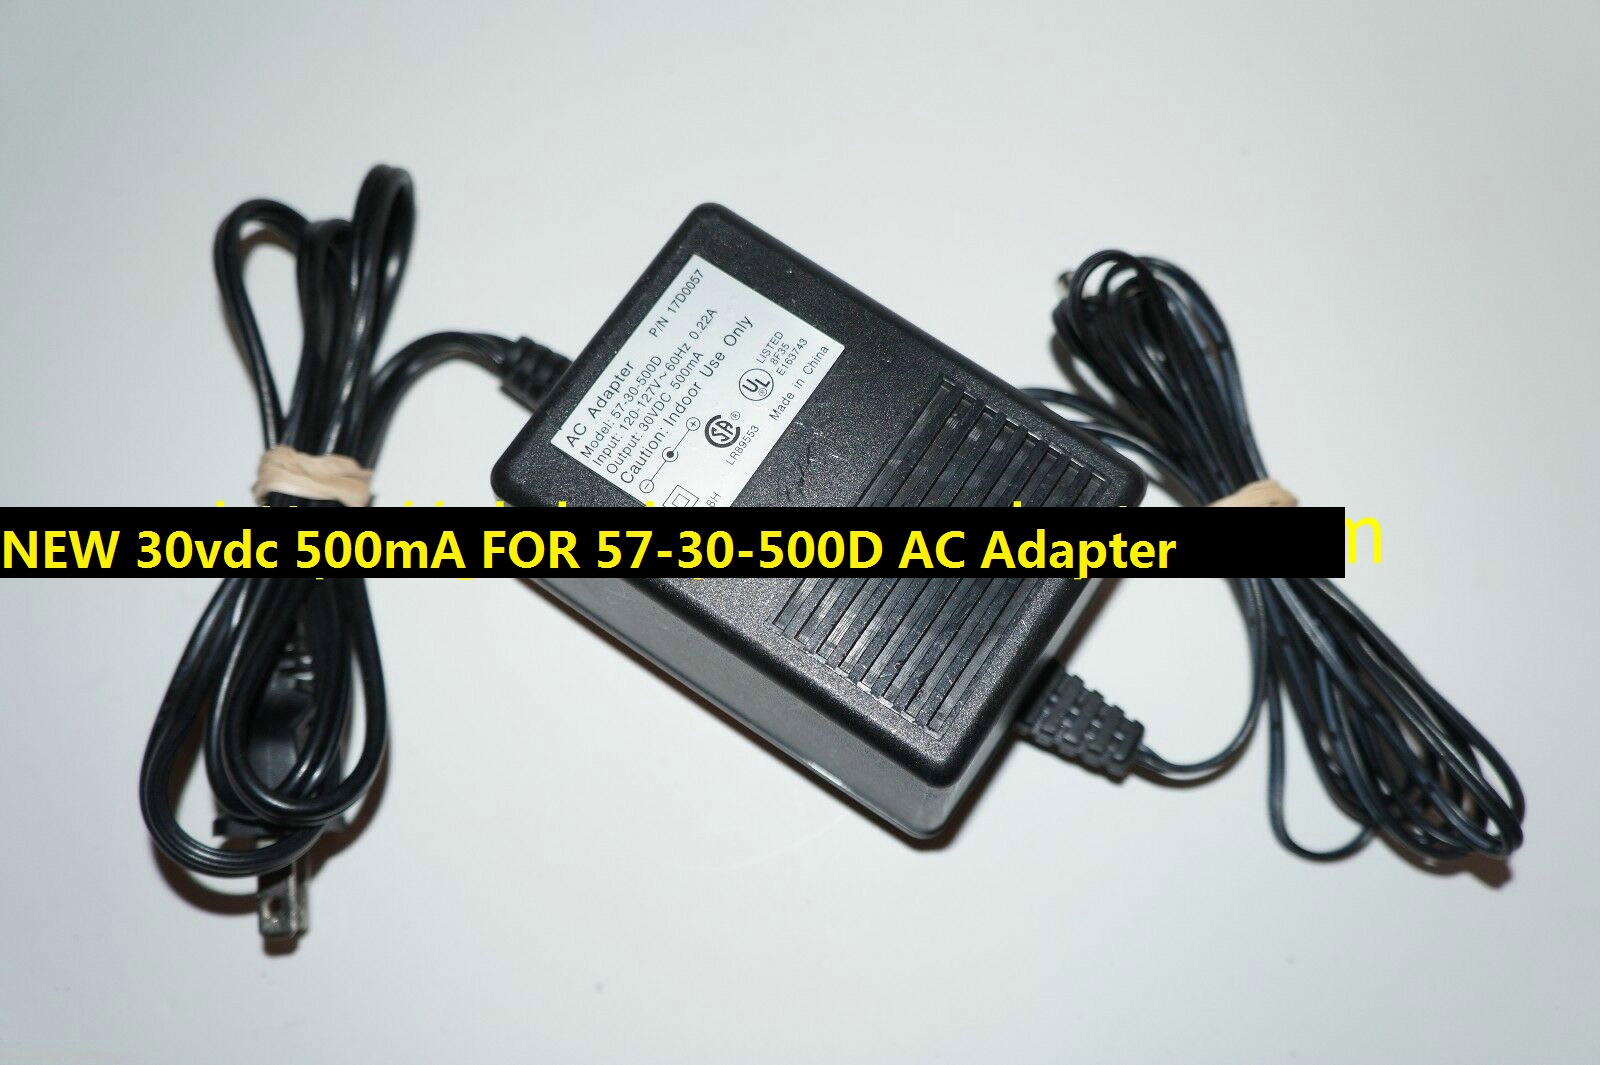 *100% Brand NEW*30vdc 500mA AC Adapter 17D0057 FOR Model: 57-30-500D Power Supply